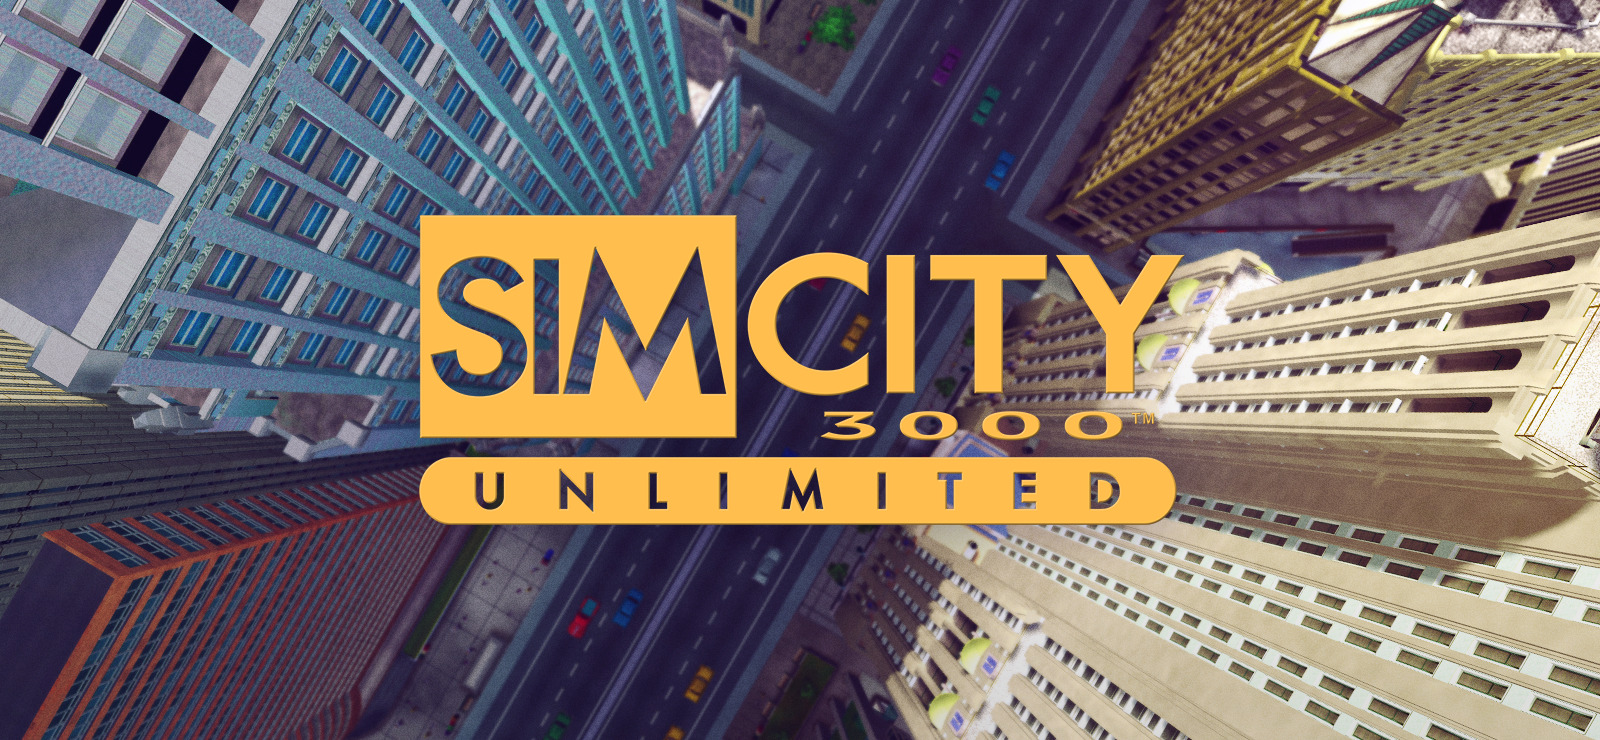 Simcity 3000 Unlimited On Gog Com